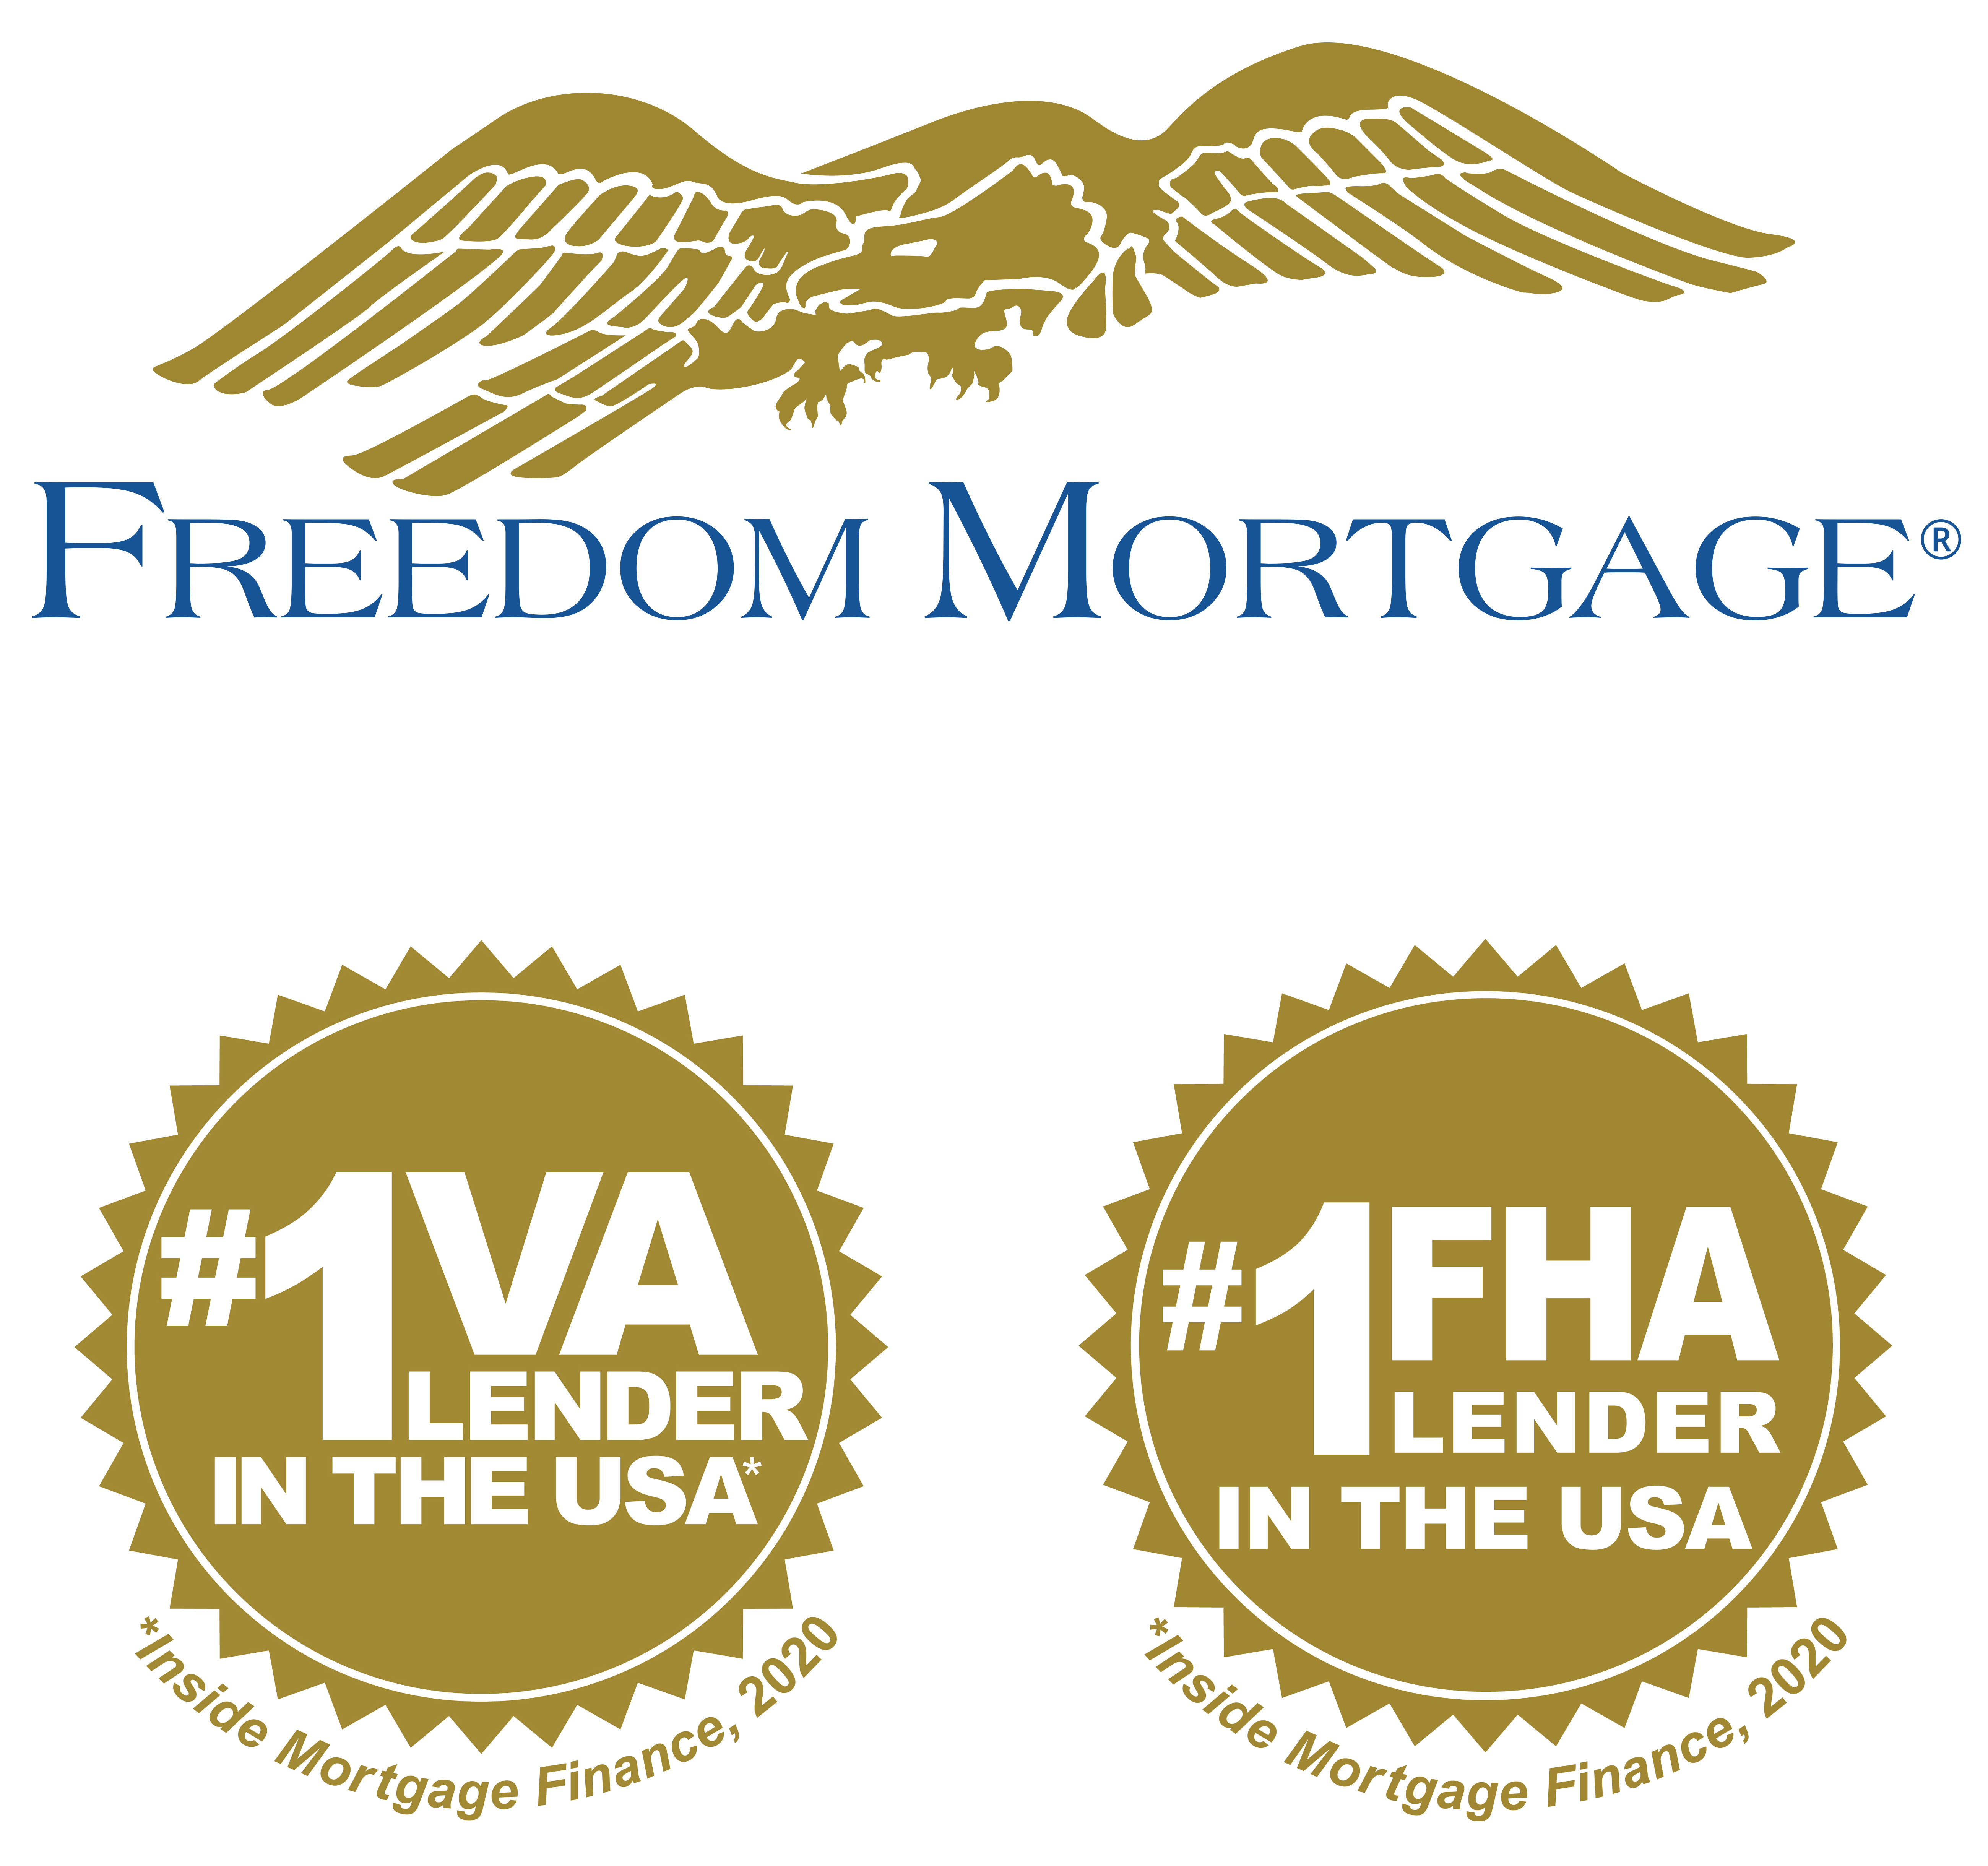 Freedom Mortgage ranked the #1 VA and #1 FHA Lender in the U.S. in 2020 according to Inside Mortgage Finance magazine. “Many Americans are not aware there are a variety of government backed loans they can take advantage of to finance their first home with very little to no down payment,” said Stanley C. Middleman, Freedom Mortgage founder and CEO. “It’s an honor to help more homeowners with their VA or FHA loans than any other lender in the country.” 
